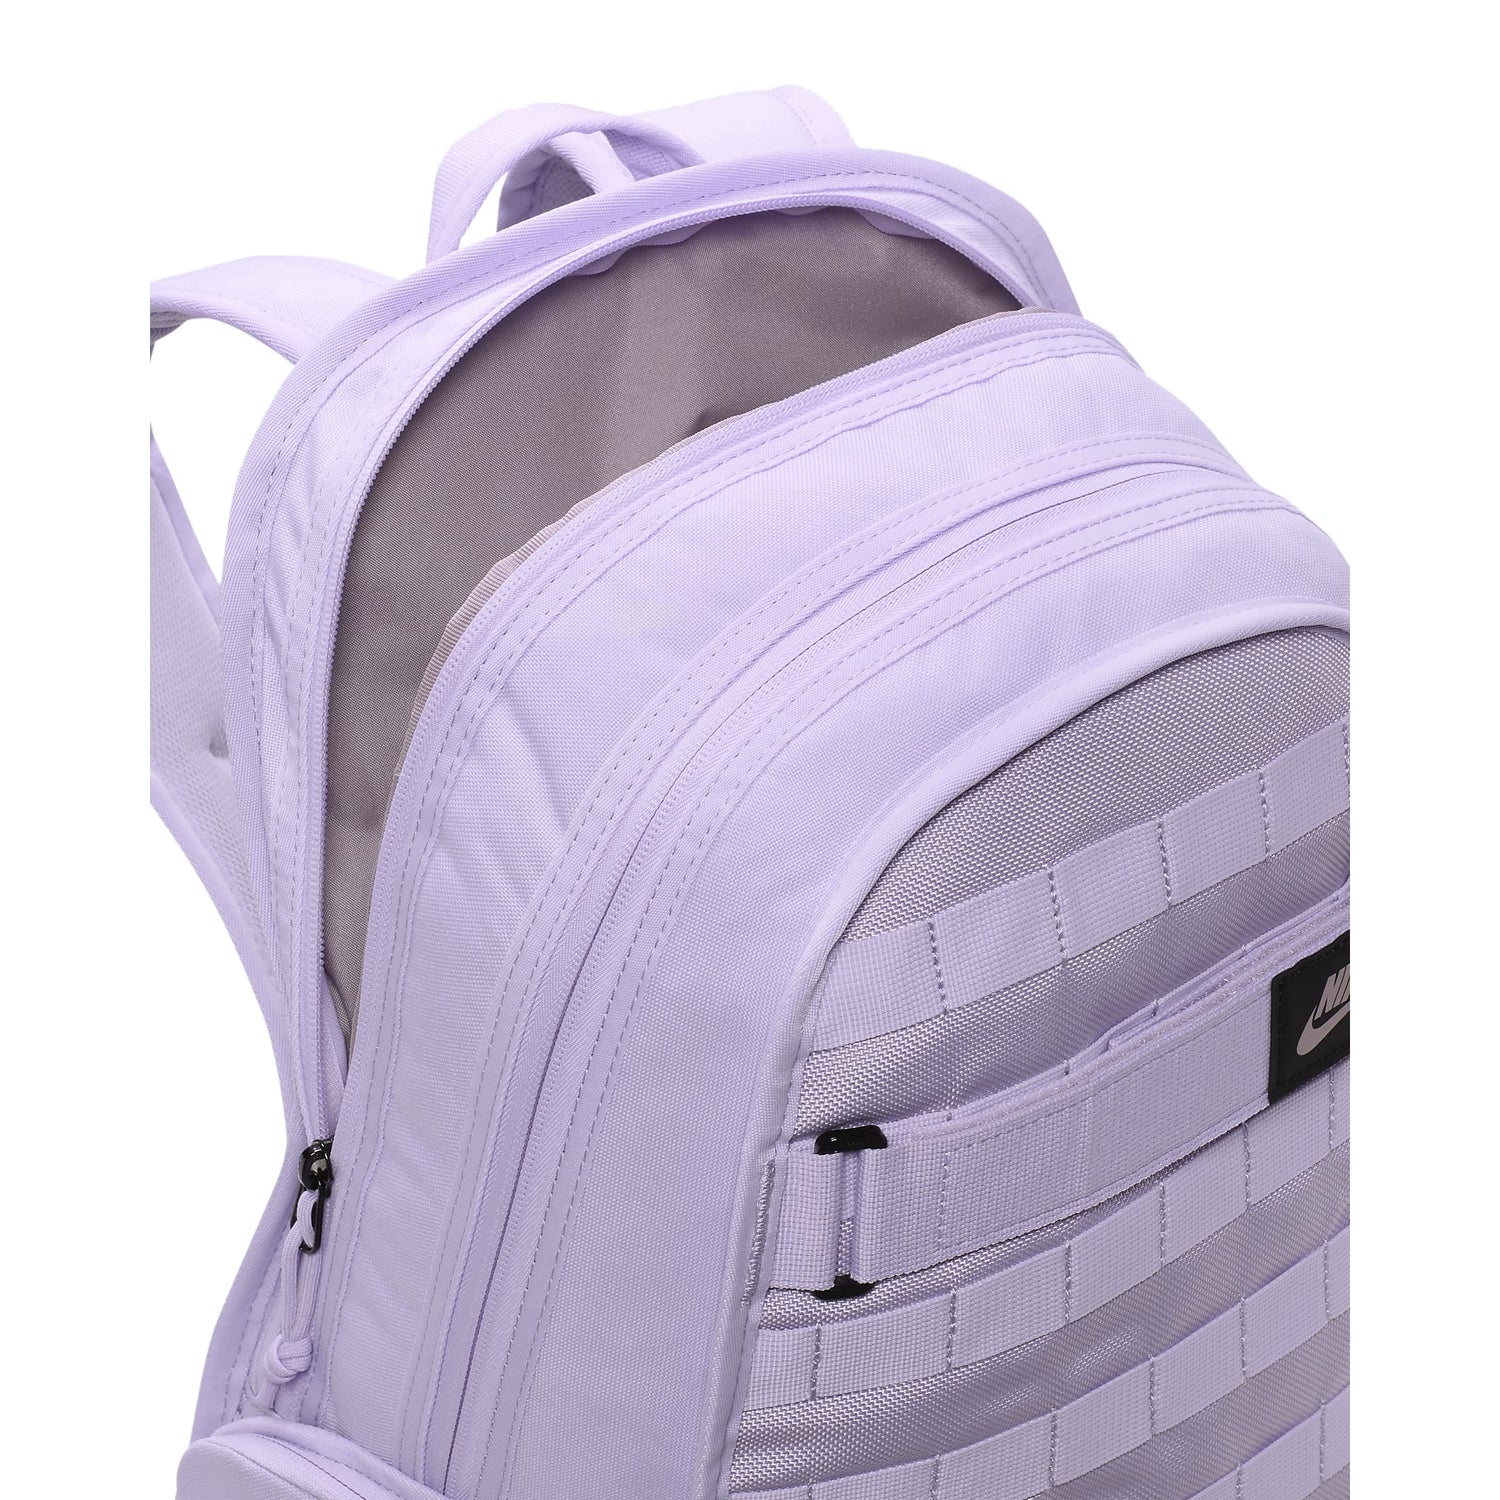 RPM BACKPACK LILAC BLOOM